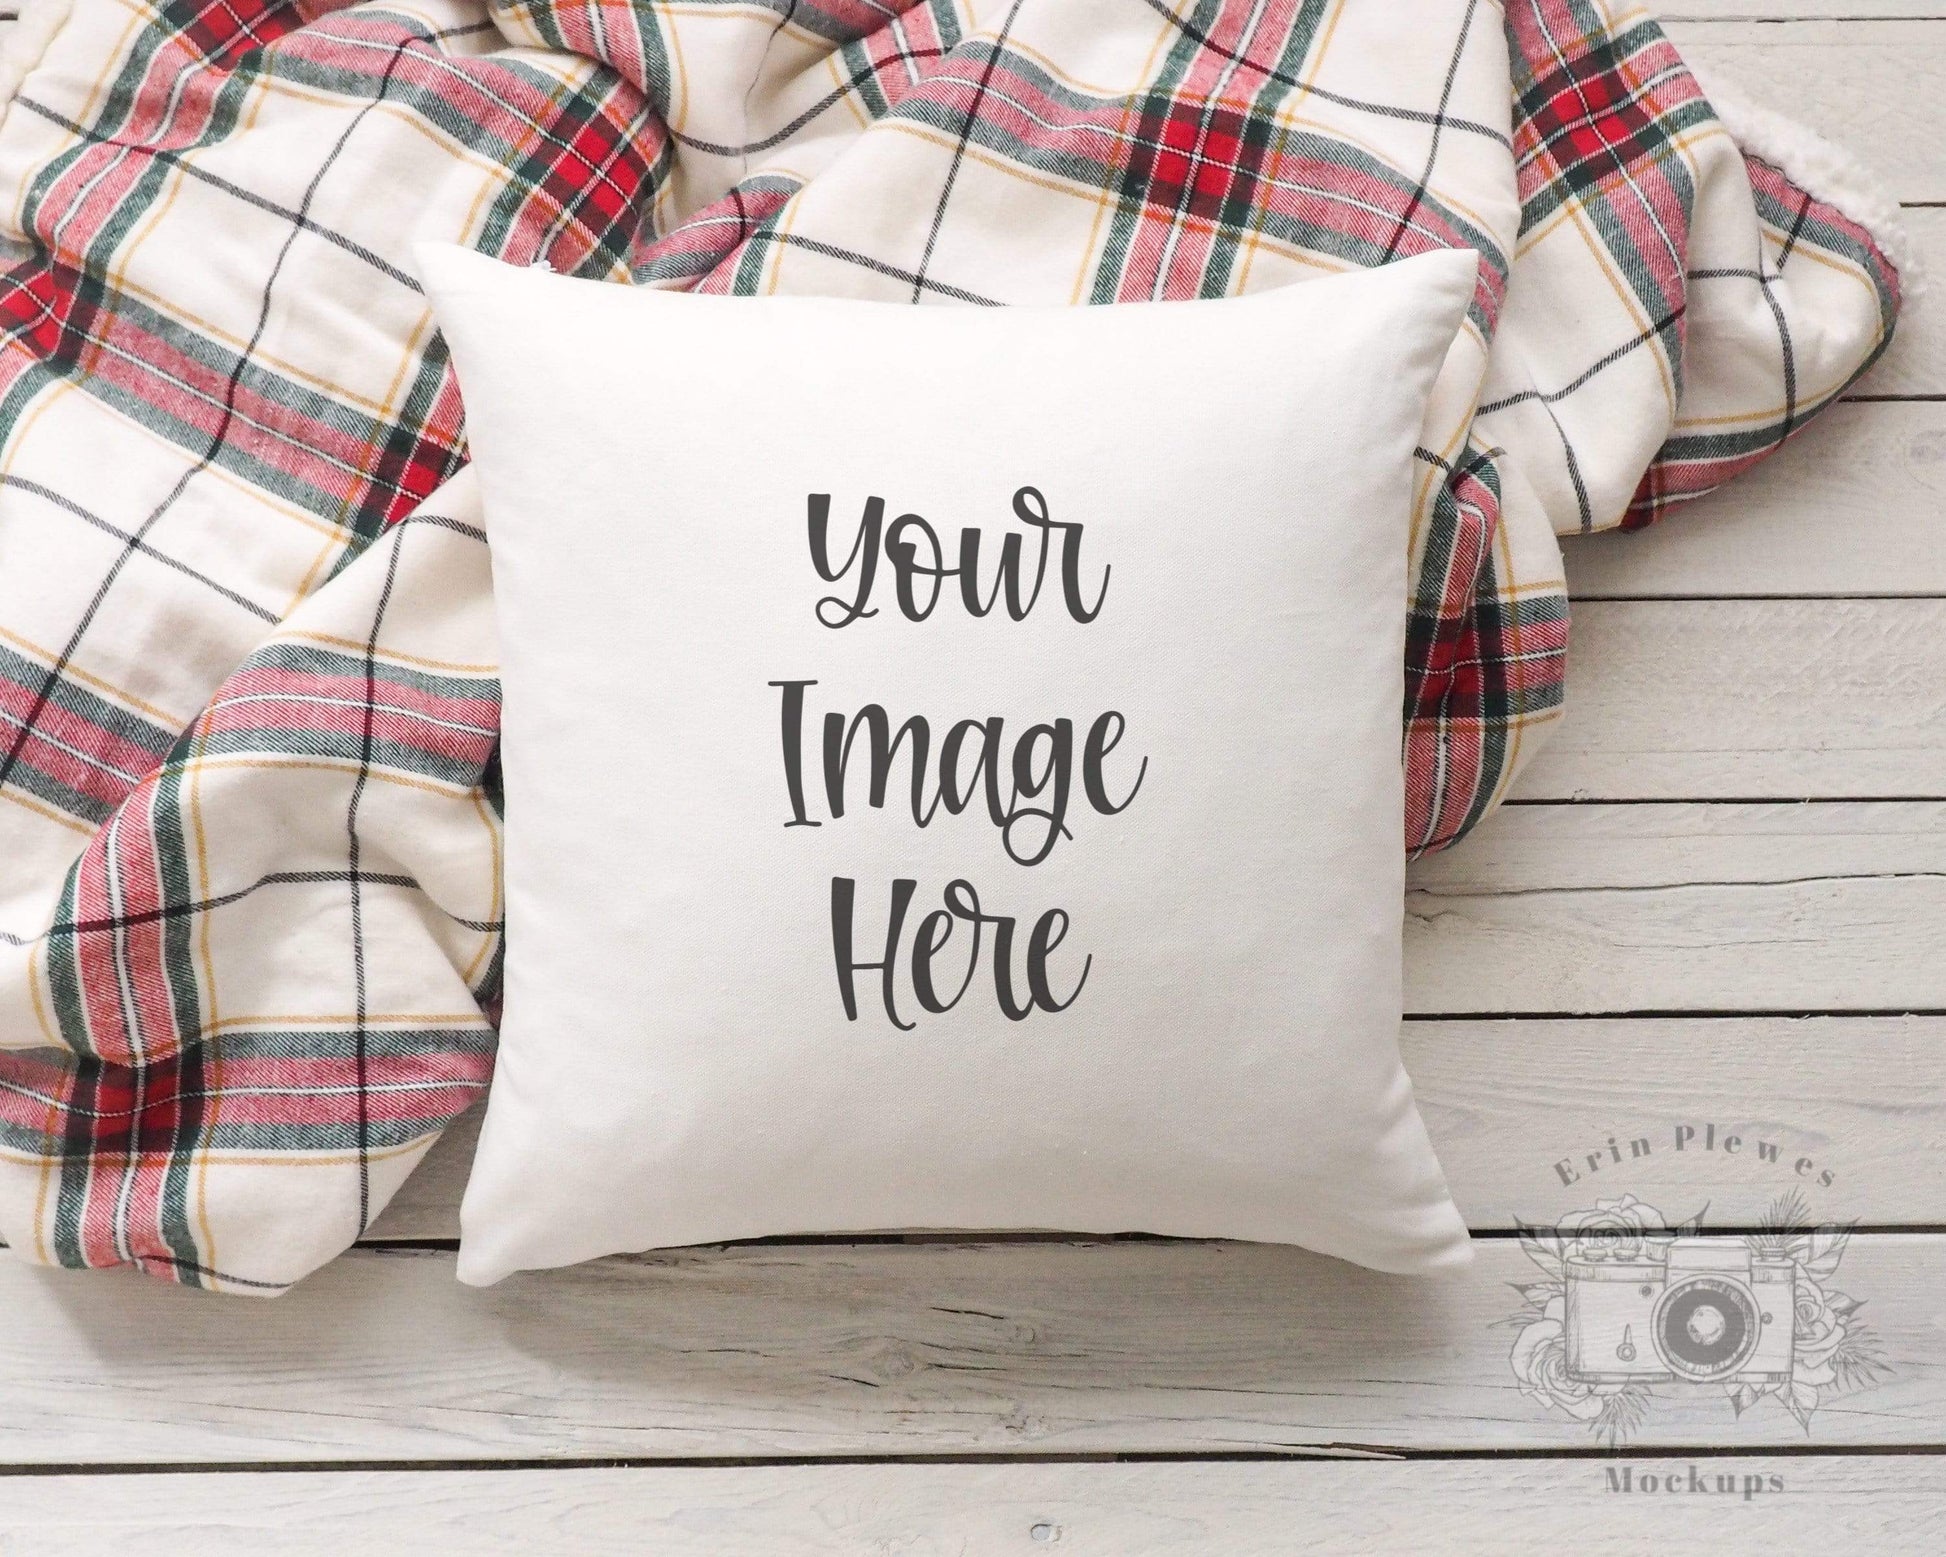 Erin Plewes Mockups Pillow Mockup, Square pillow mockup on white rustic wood background, White pillow case mock up jpeg digital download